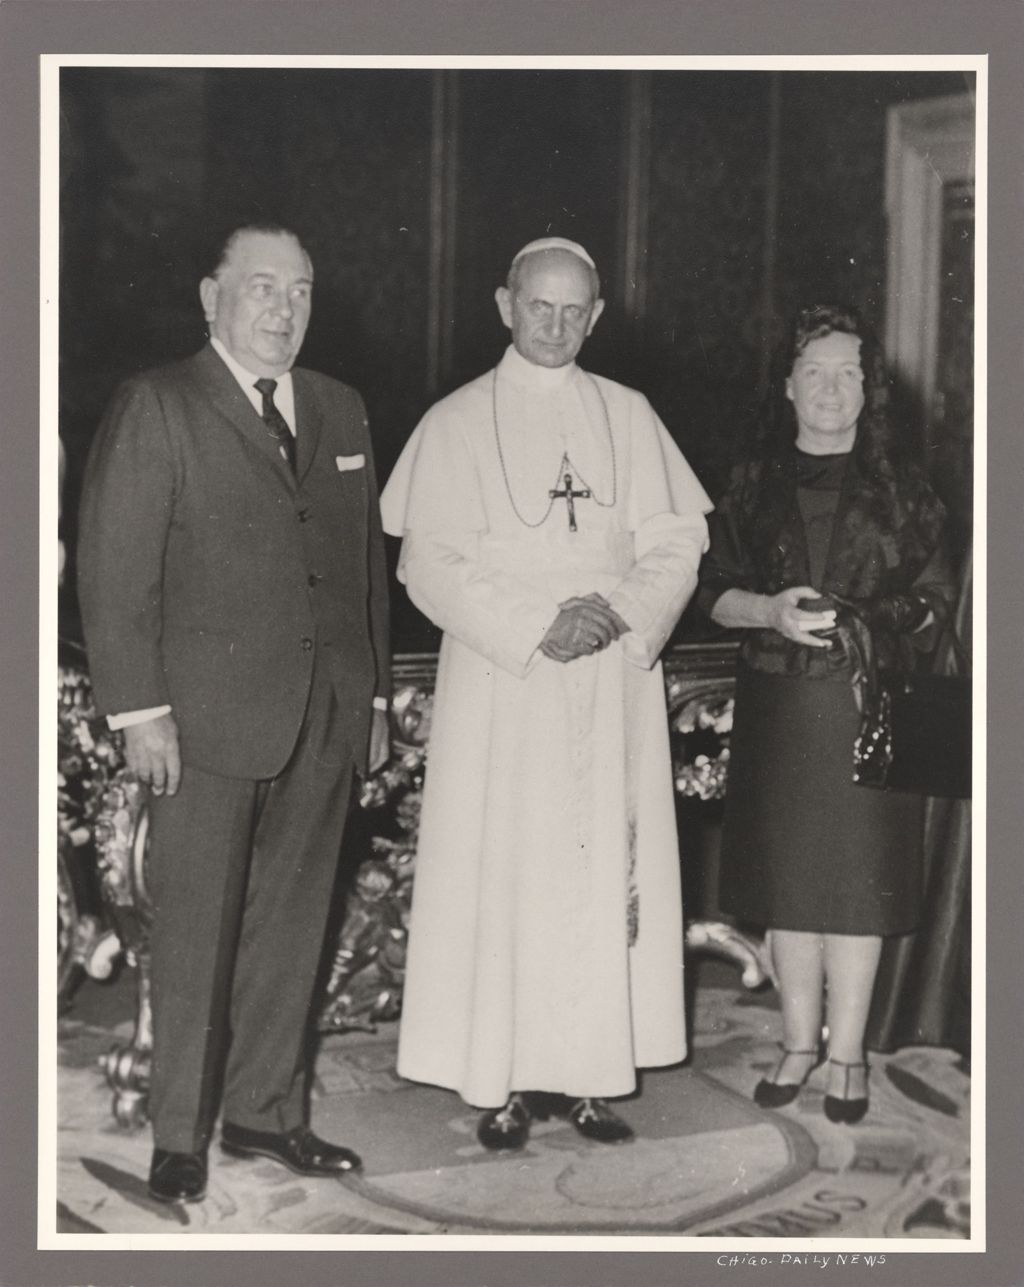 Miniature of Richard J. Daley and Eleanor Daley with Pope Paul VI in Rome